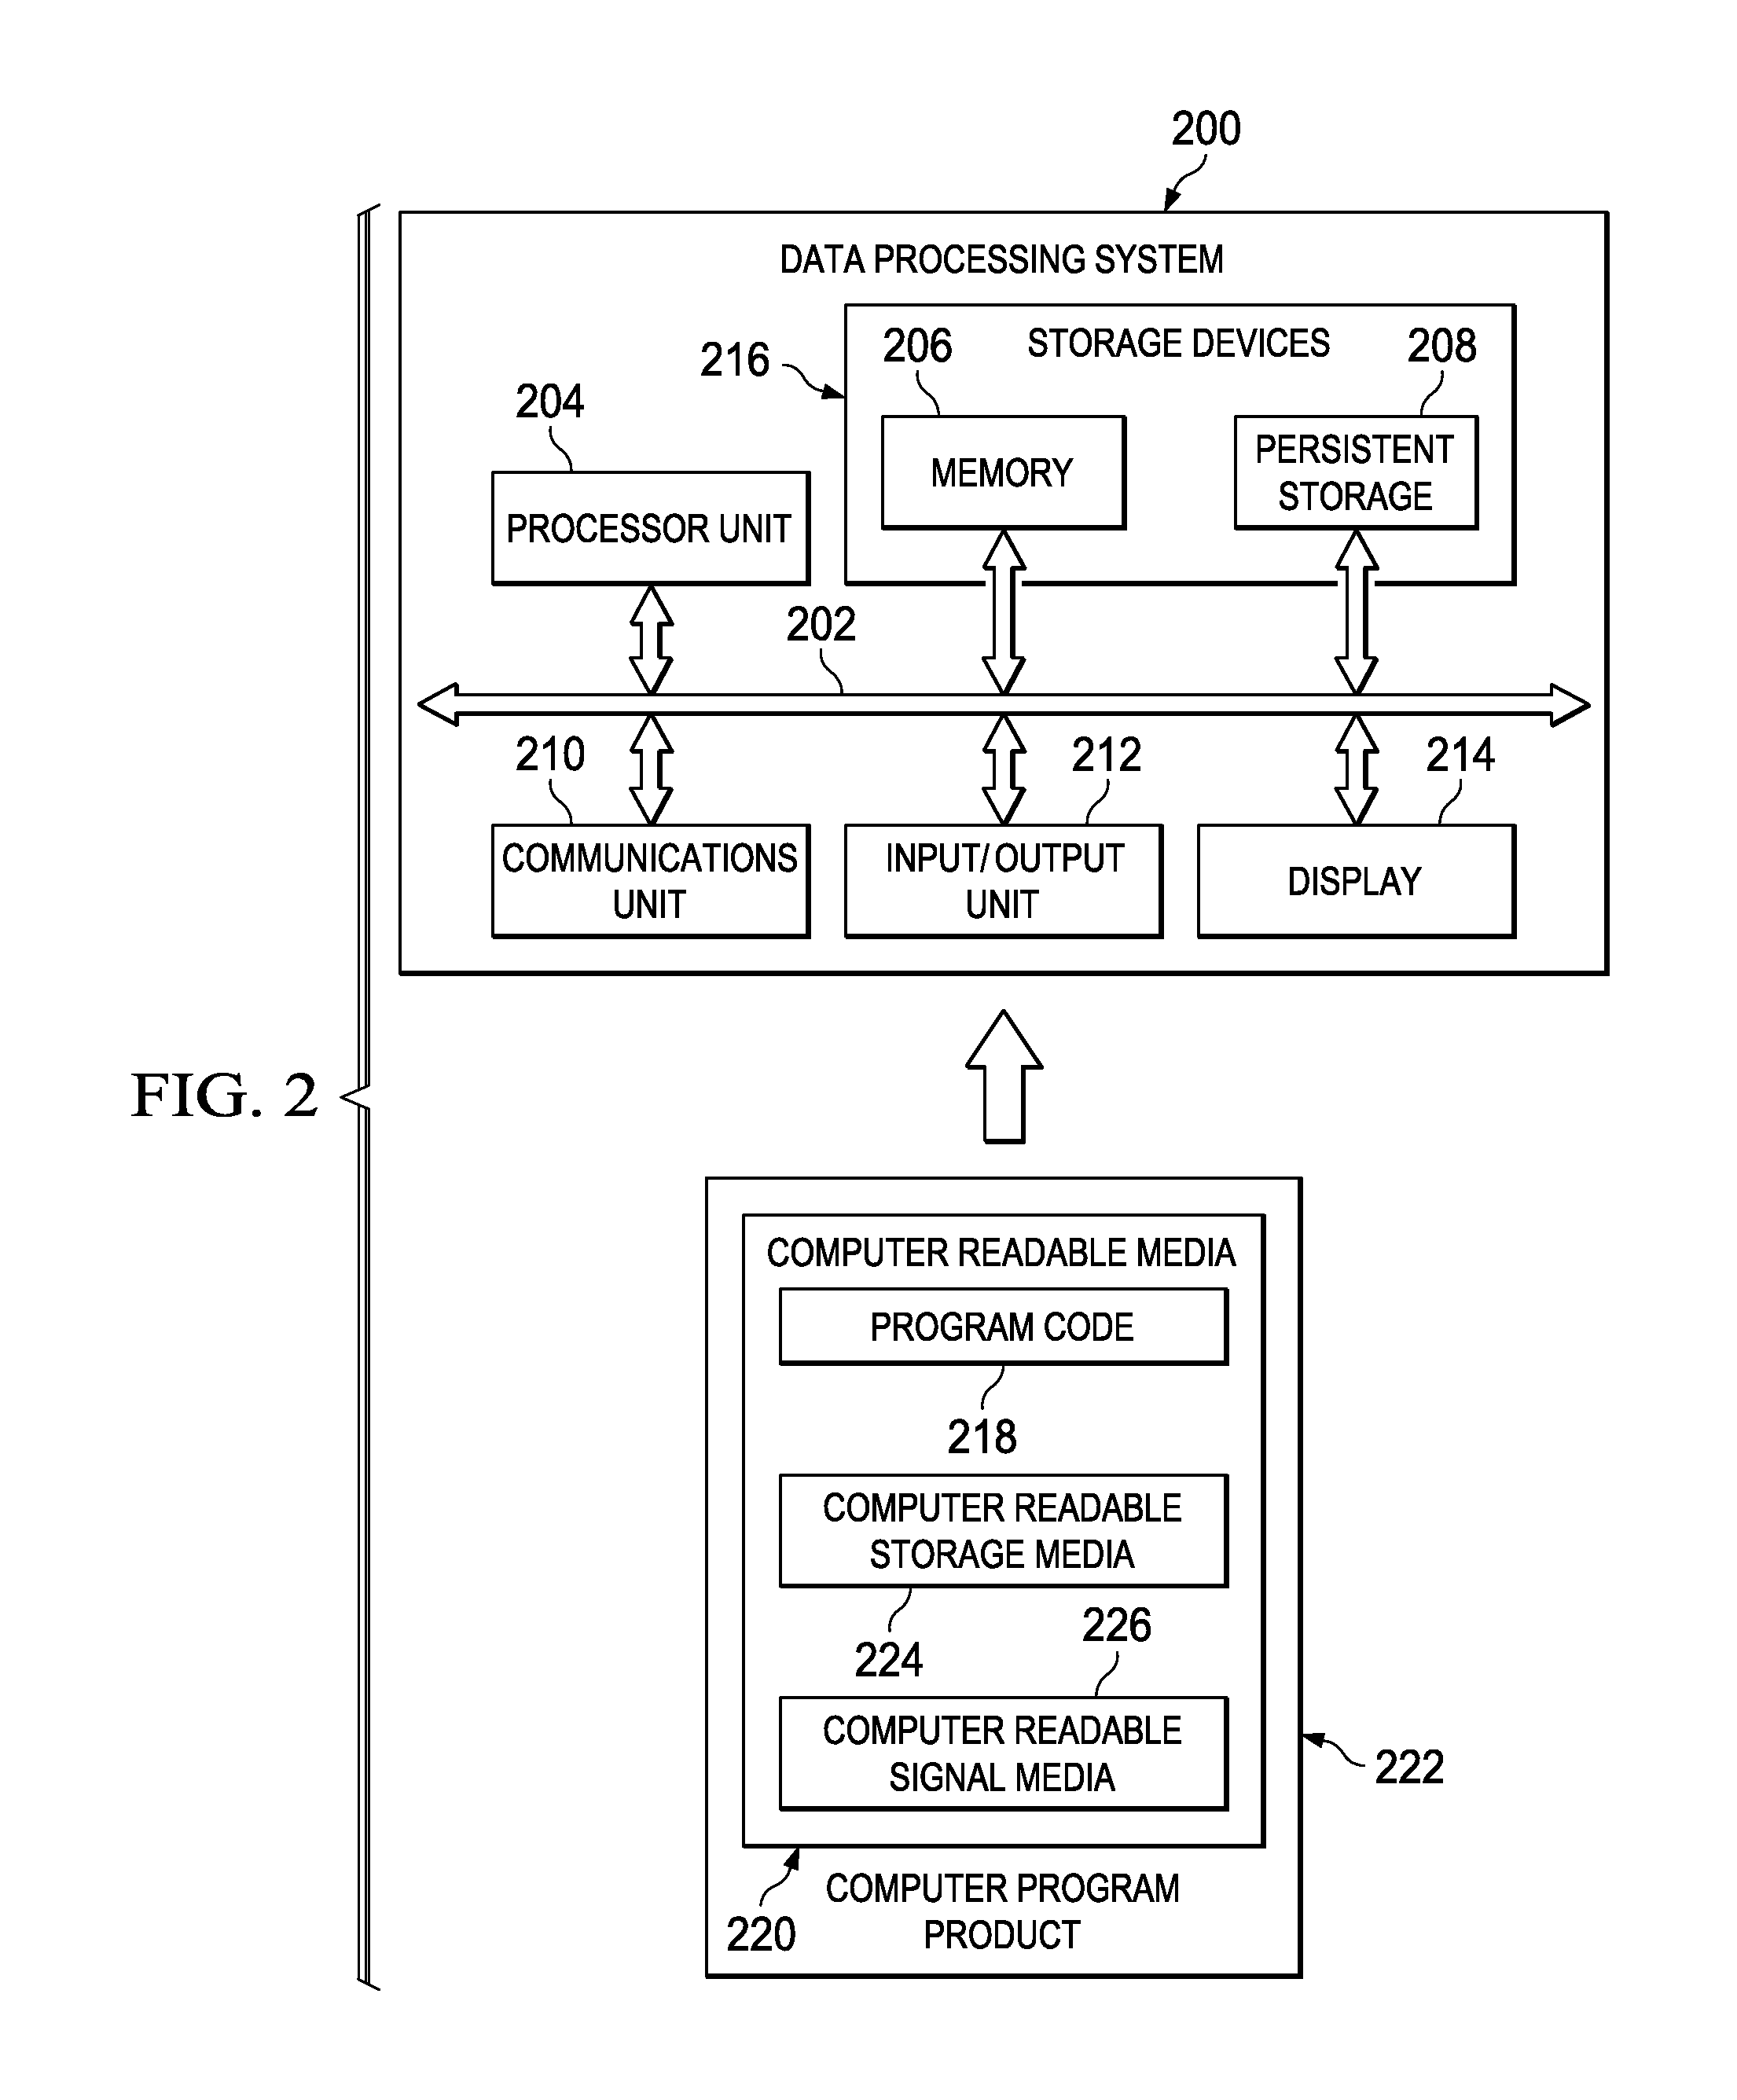 Transparent Header Modification for Reducing Serving Load Based on Current and Projected Usage